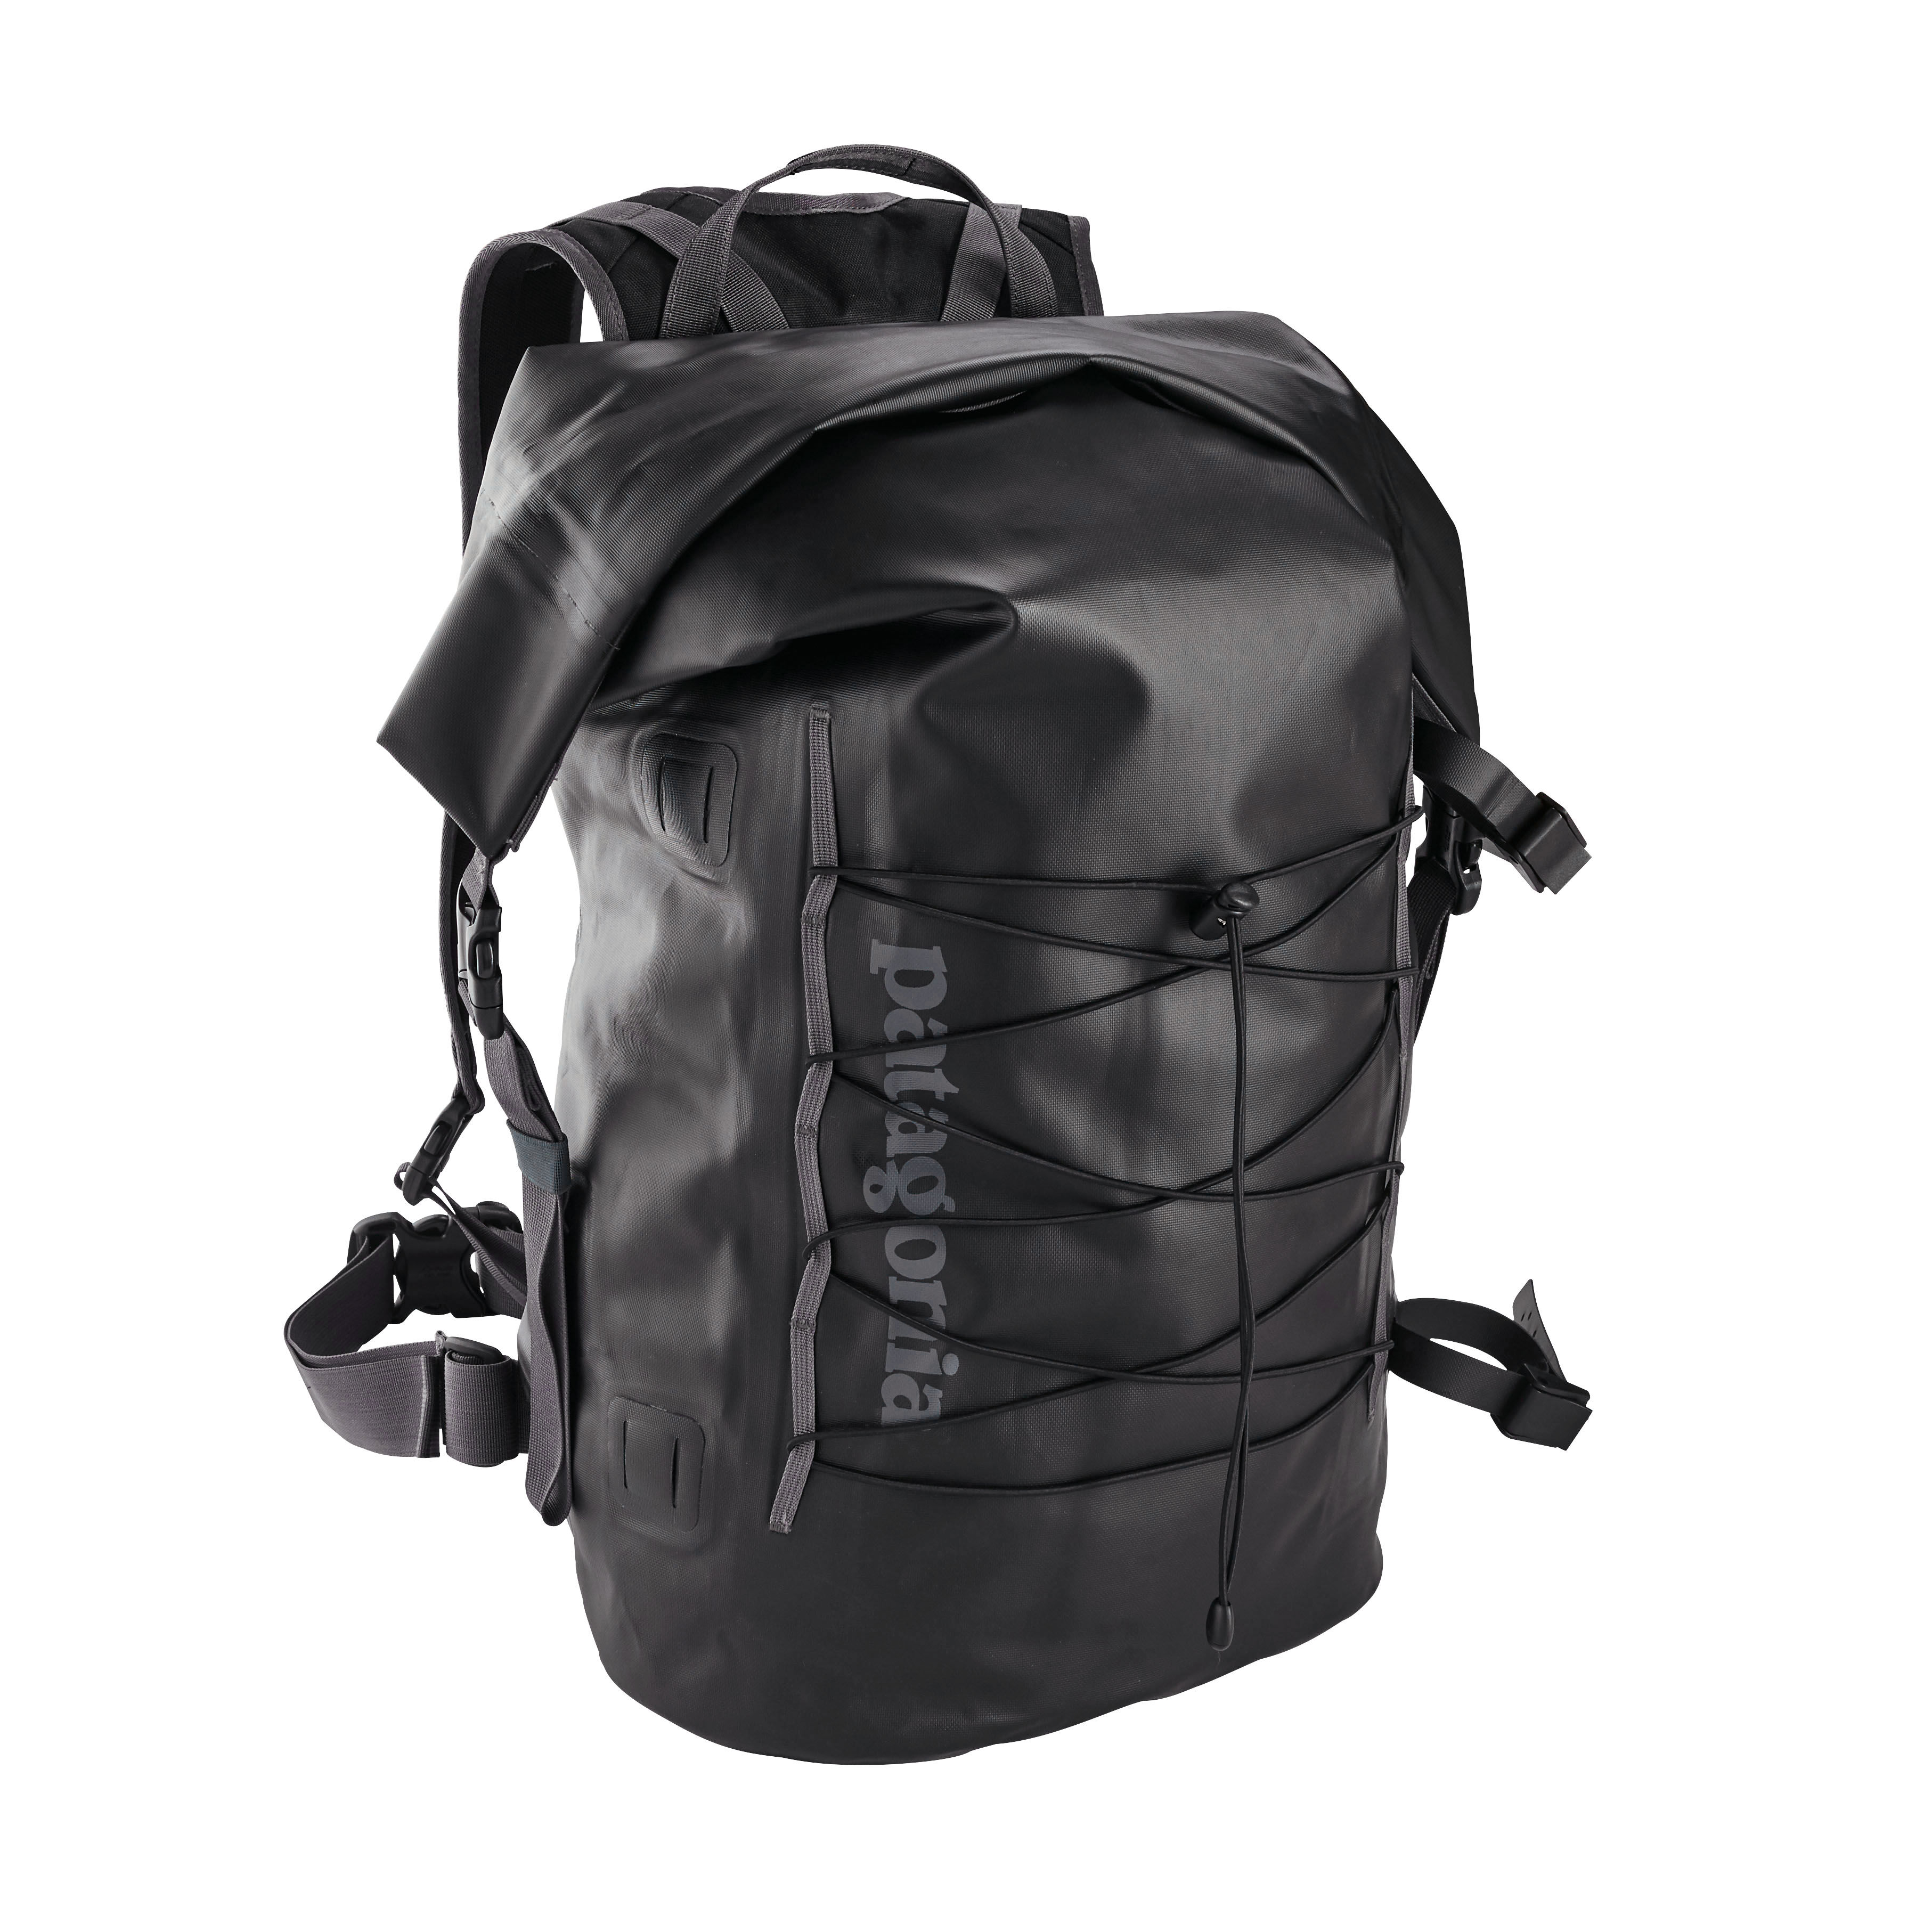 Patagonia - Stormfront Roll Top Pack 45 L - Mochila